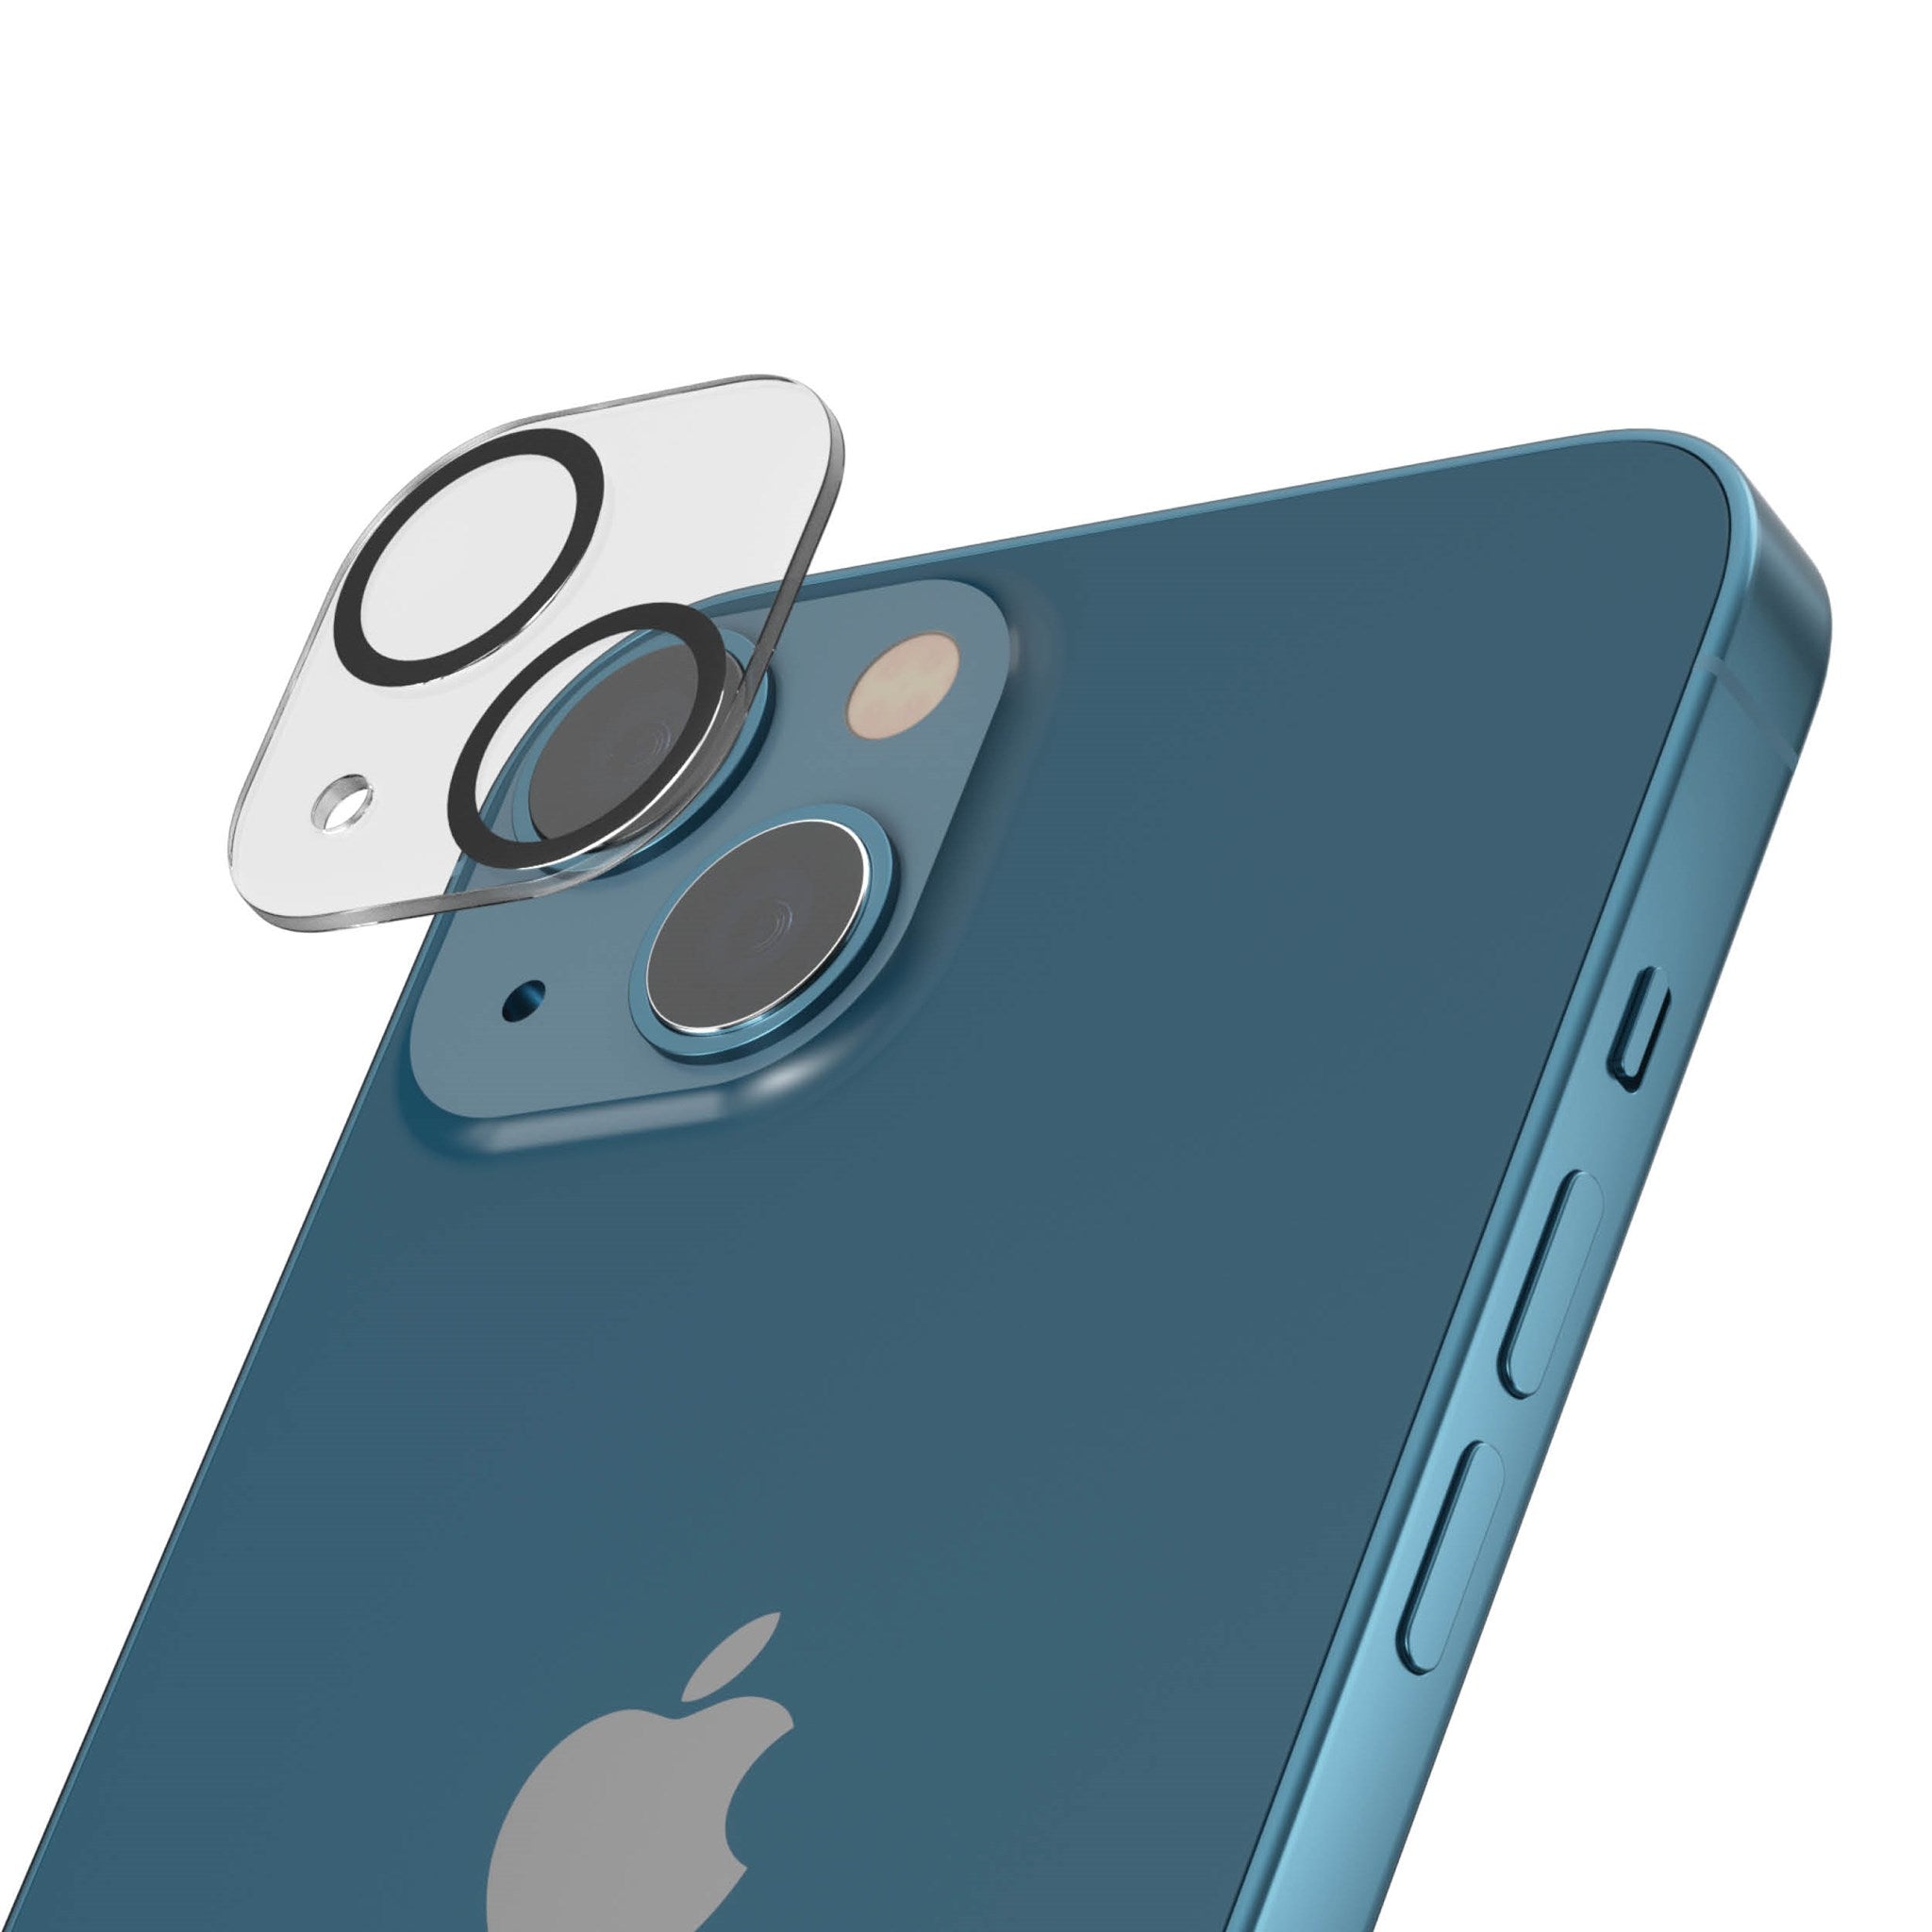 PanzerGlass® PicturePerfect Camera Lens Protector Apple iPhone 13